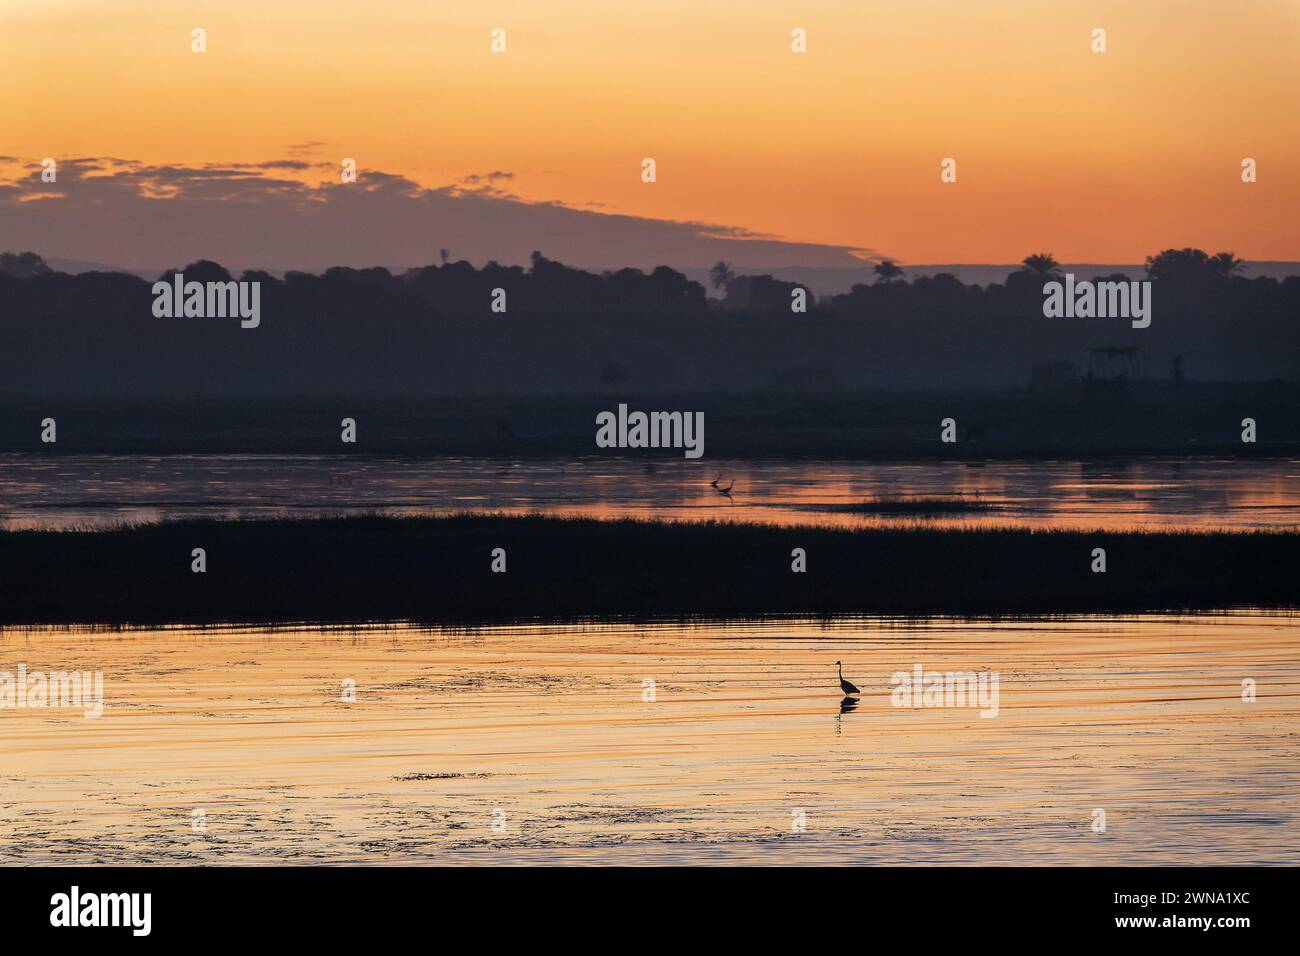 Silhouette of a great egret, wading bird on the Nile river at sunset, Egypt Stock Photo